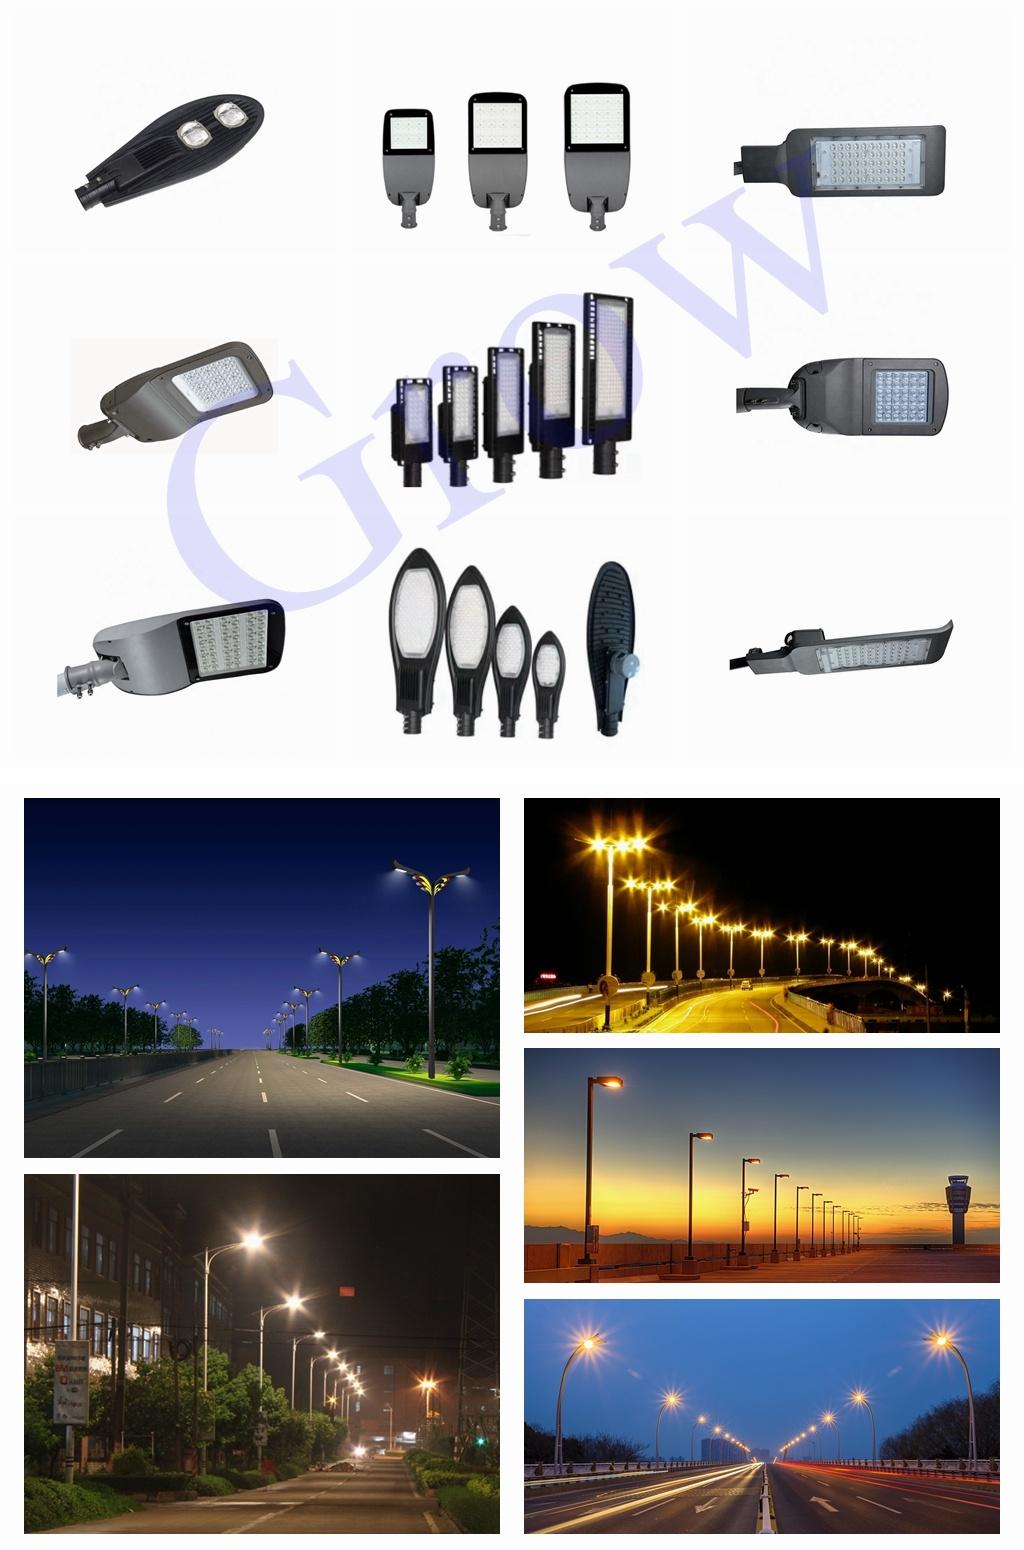 Factory Price High Quality LED Street Light 50W 100W Outdoor Security LED Lighting Waterproof IP65 2 Years Warranty for Garden and Street Lighting